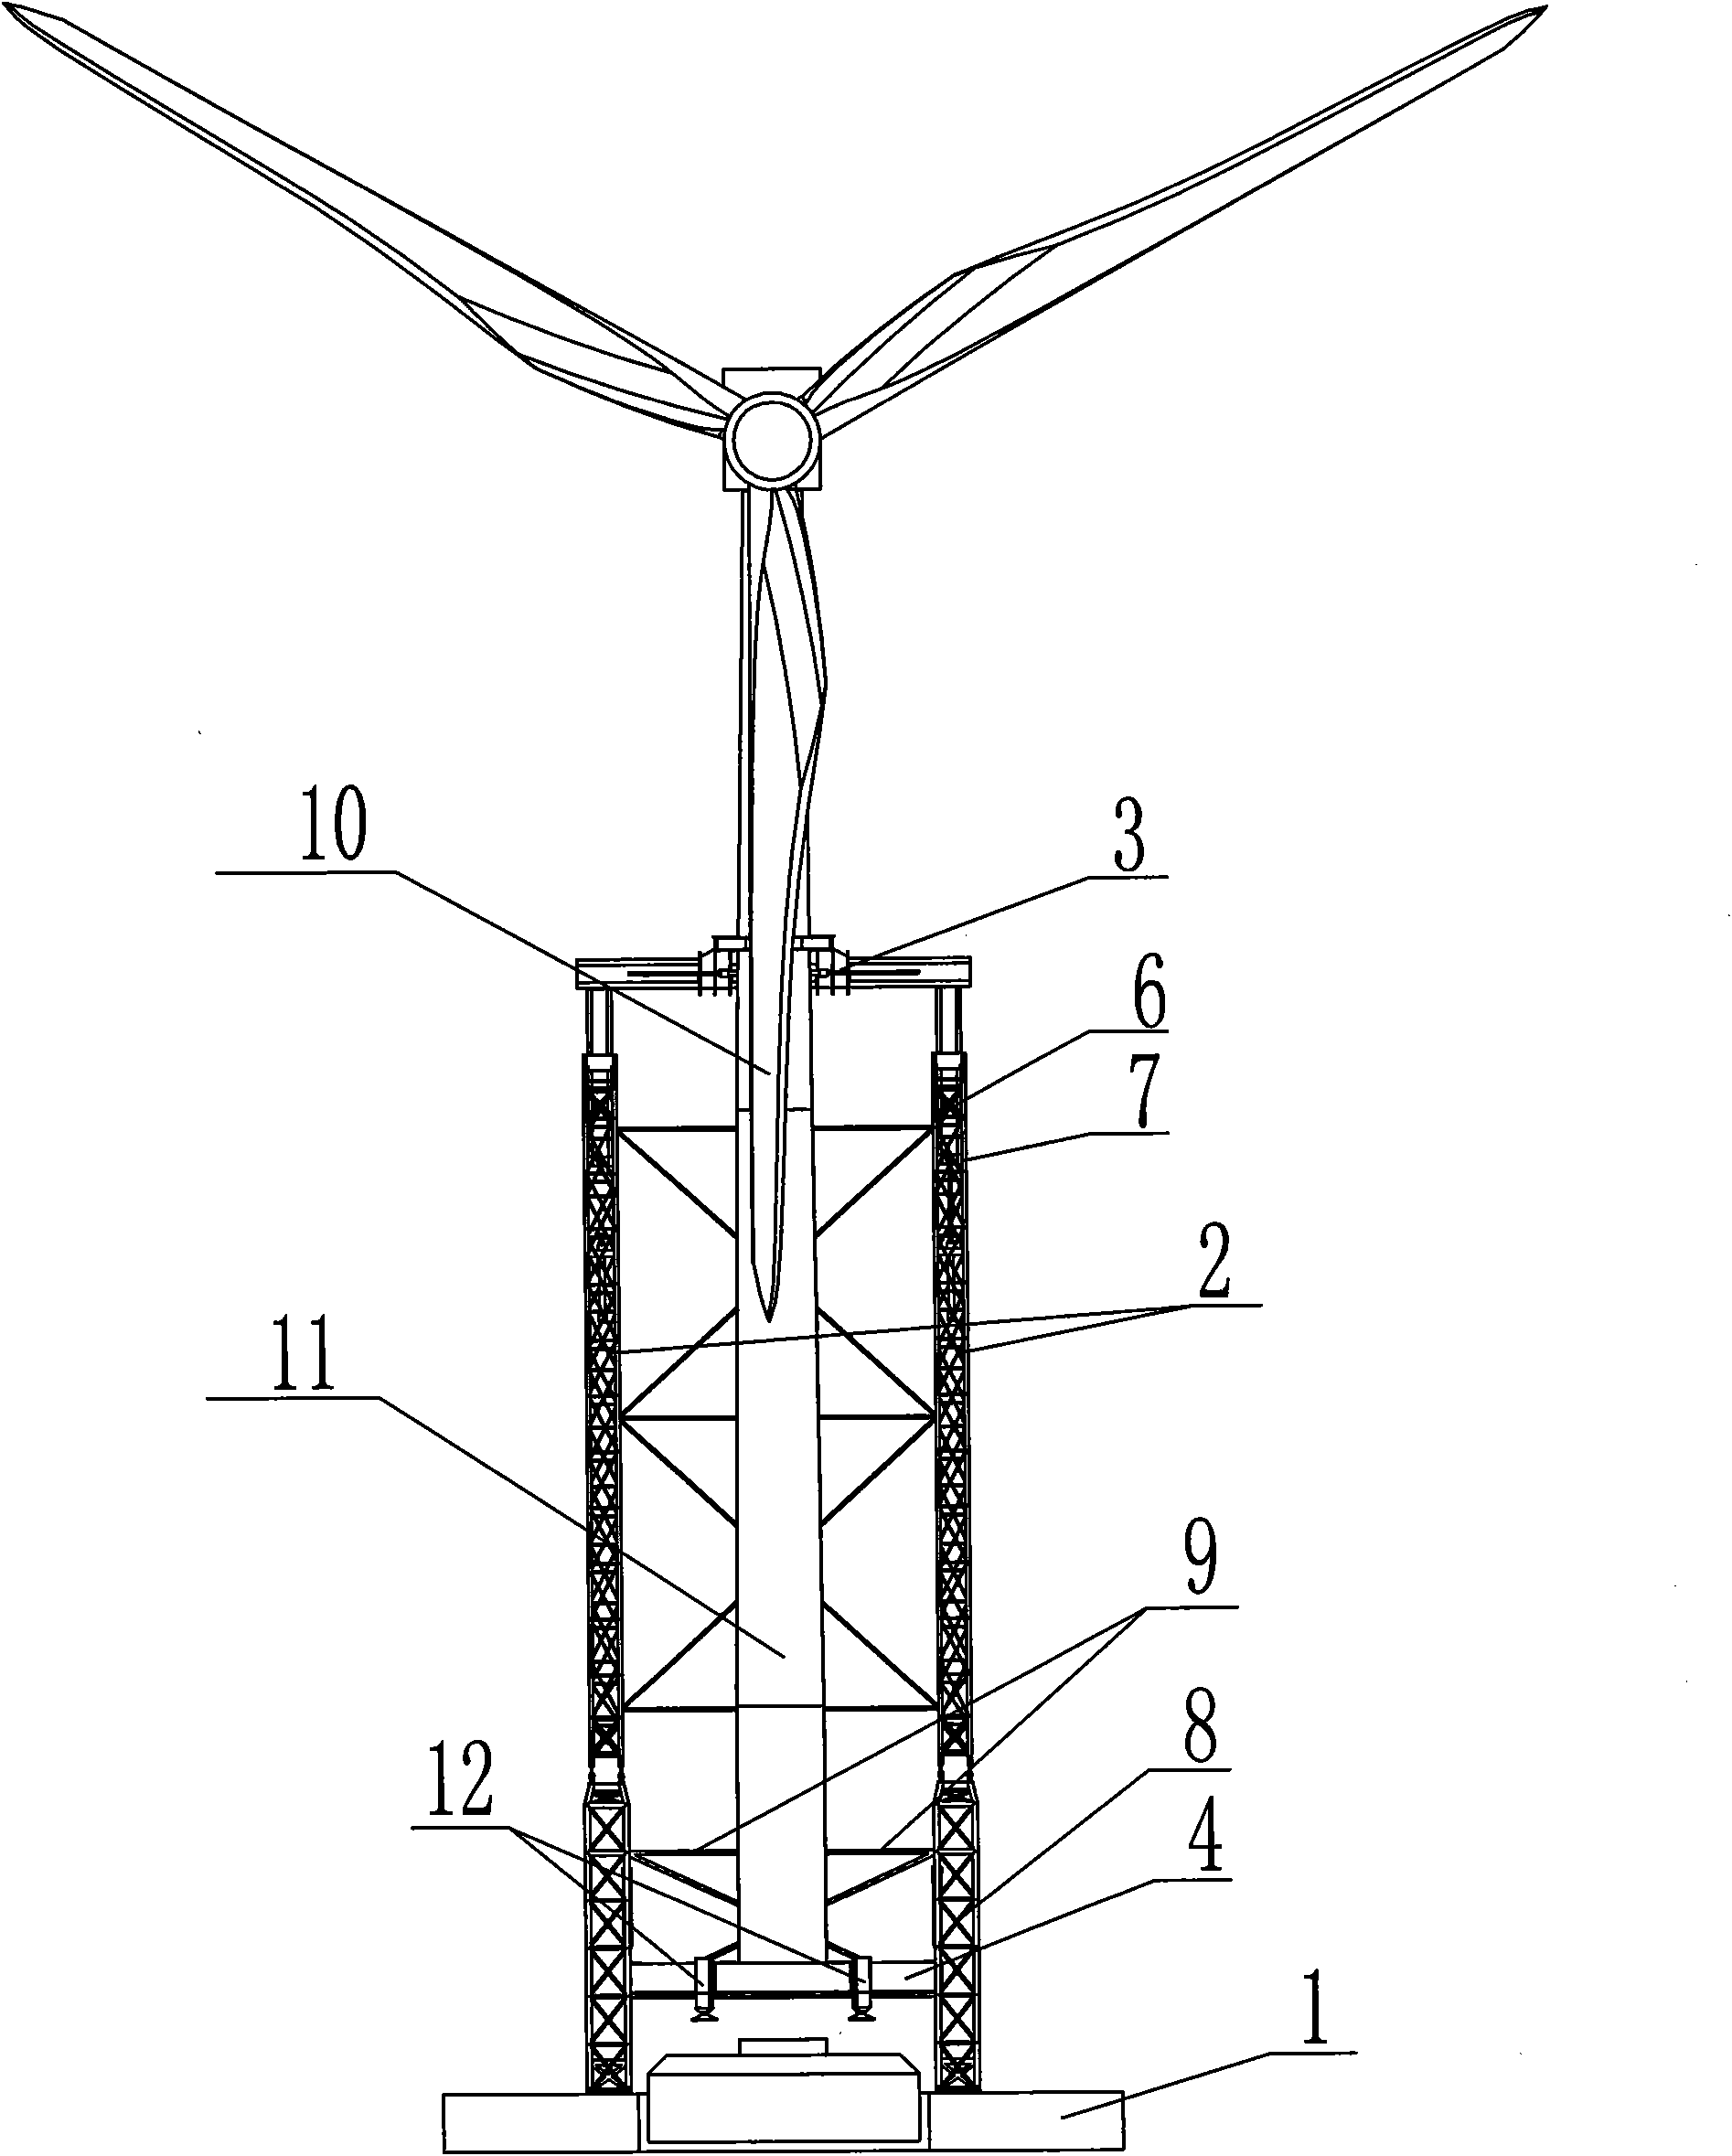 Construction method and equipment for integrally mounting offshore wind generating set